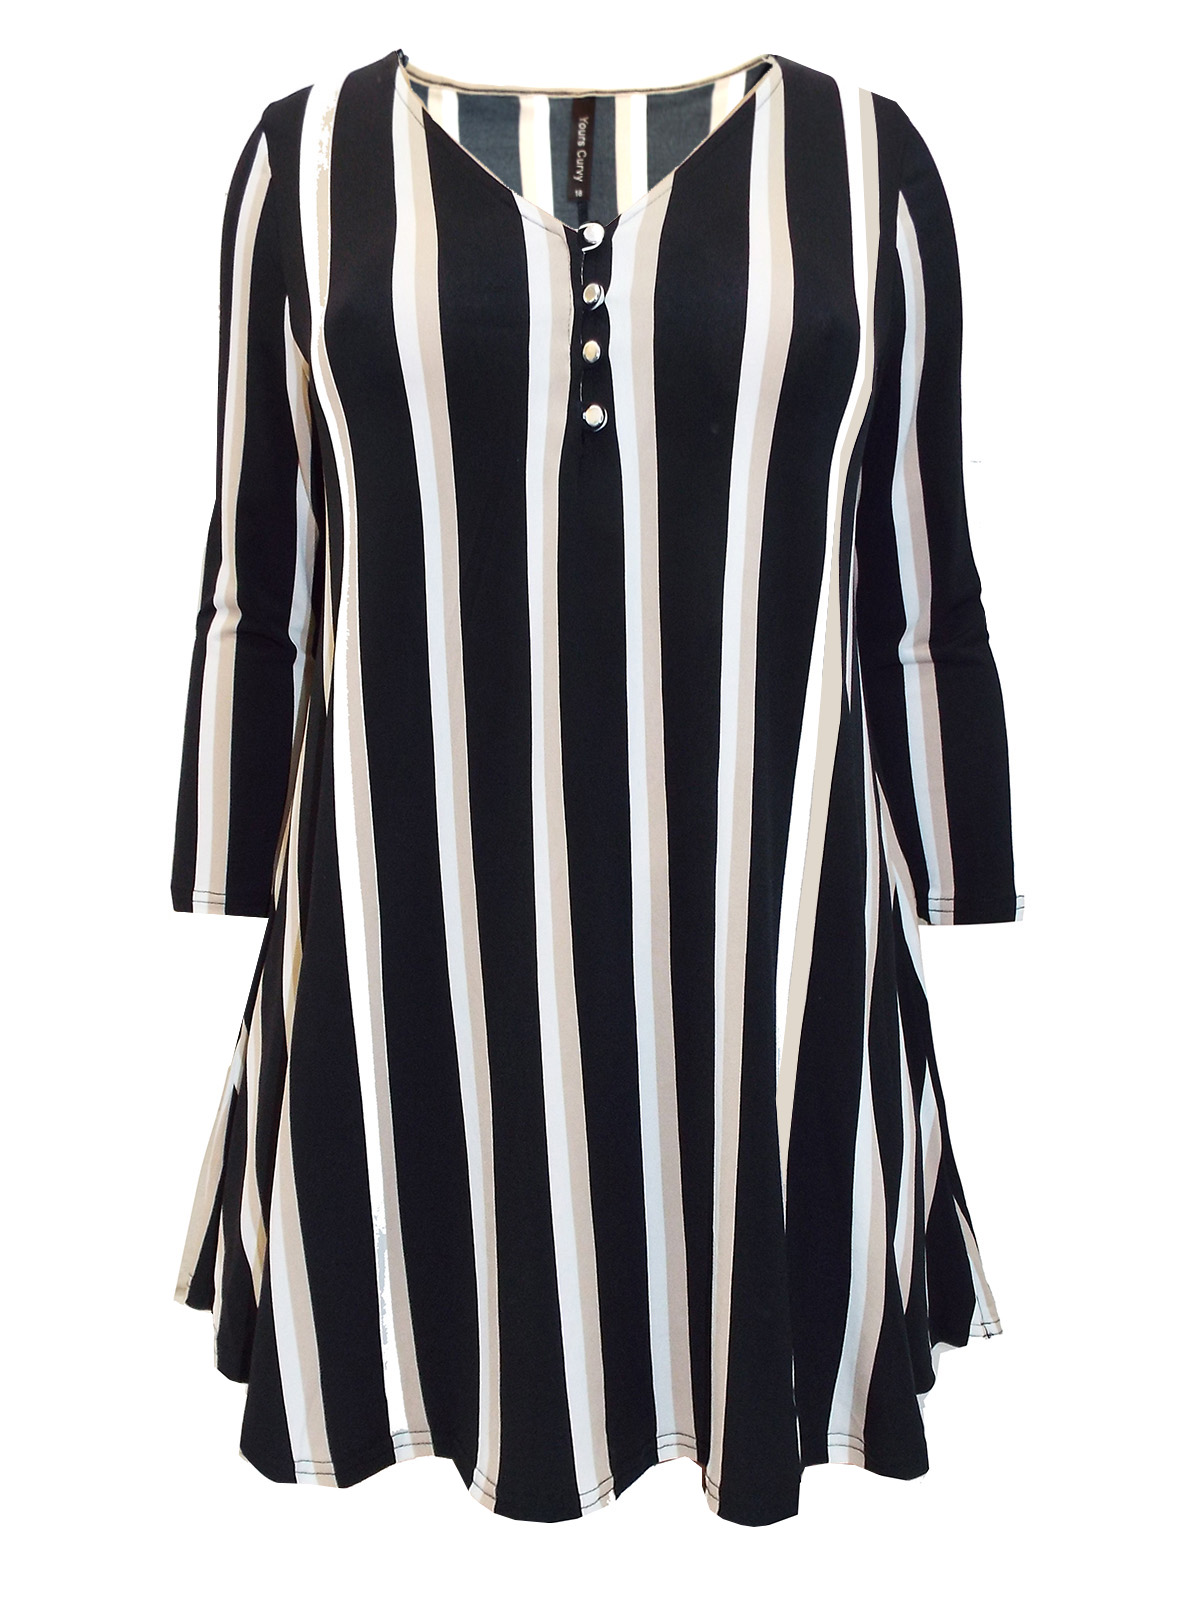 NEW YOURS CURVY BLACK VERTICAL STRIPE V NECK BUTTON BLOUSE TUNIC SIZES 14 TO 32